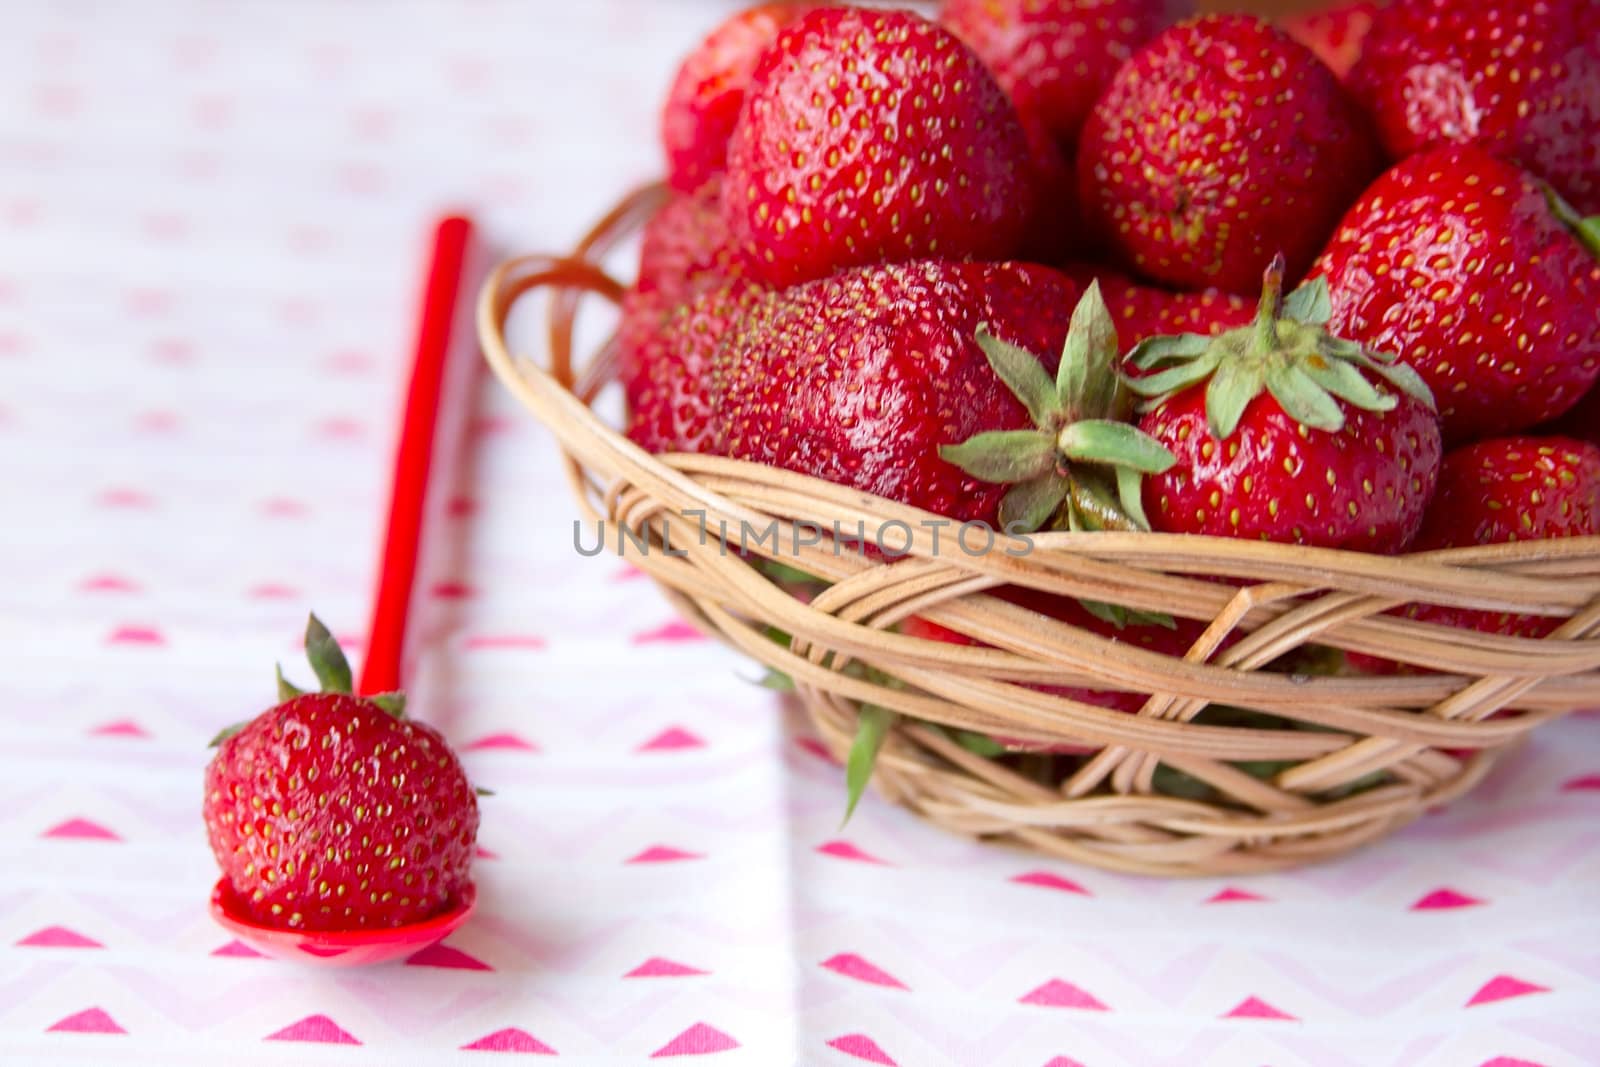 Strawberries in a basket by victosha